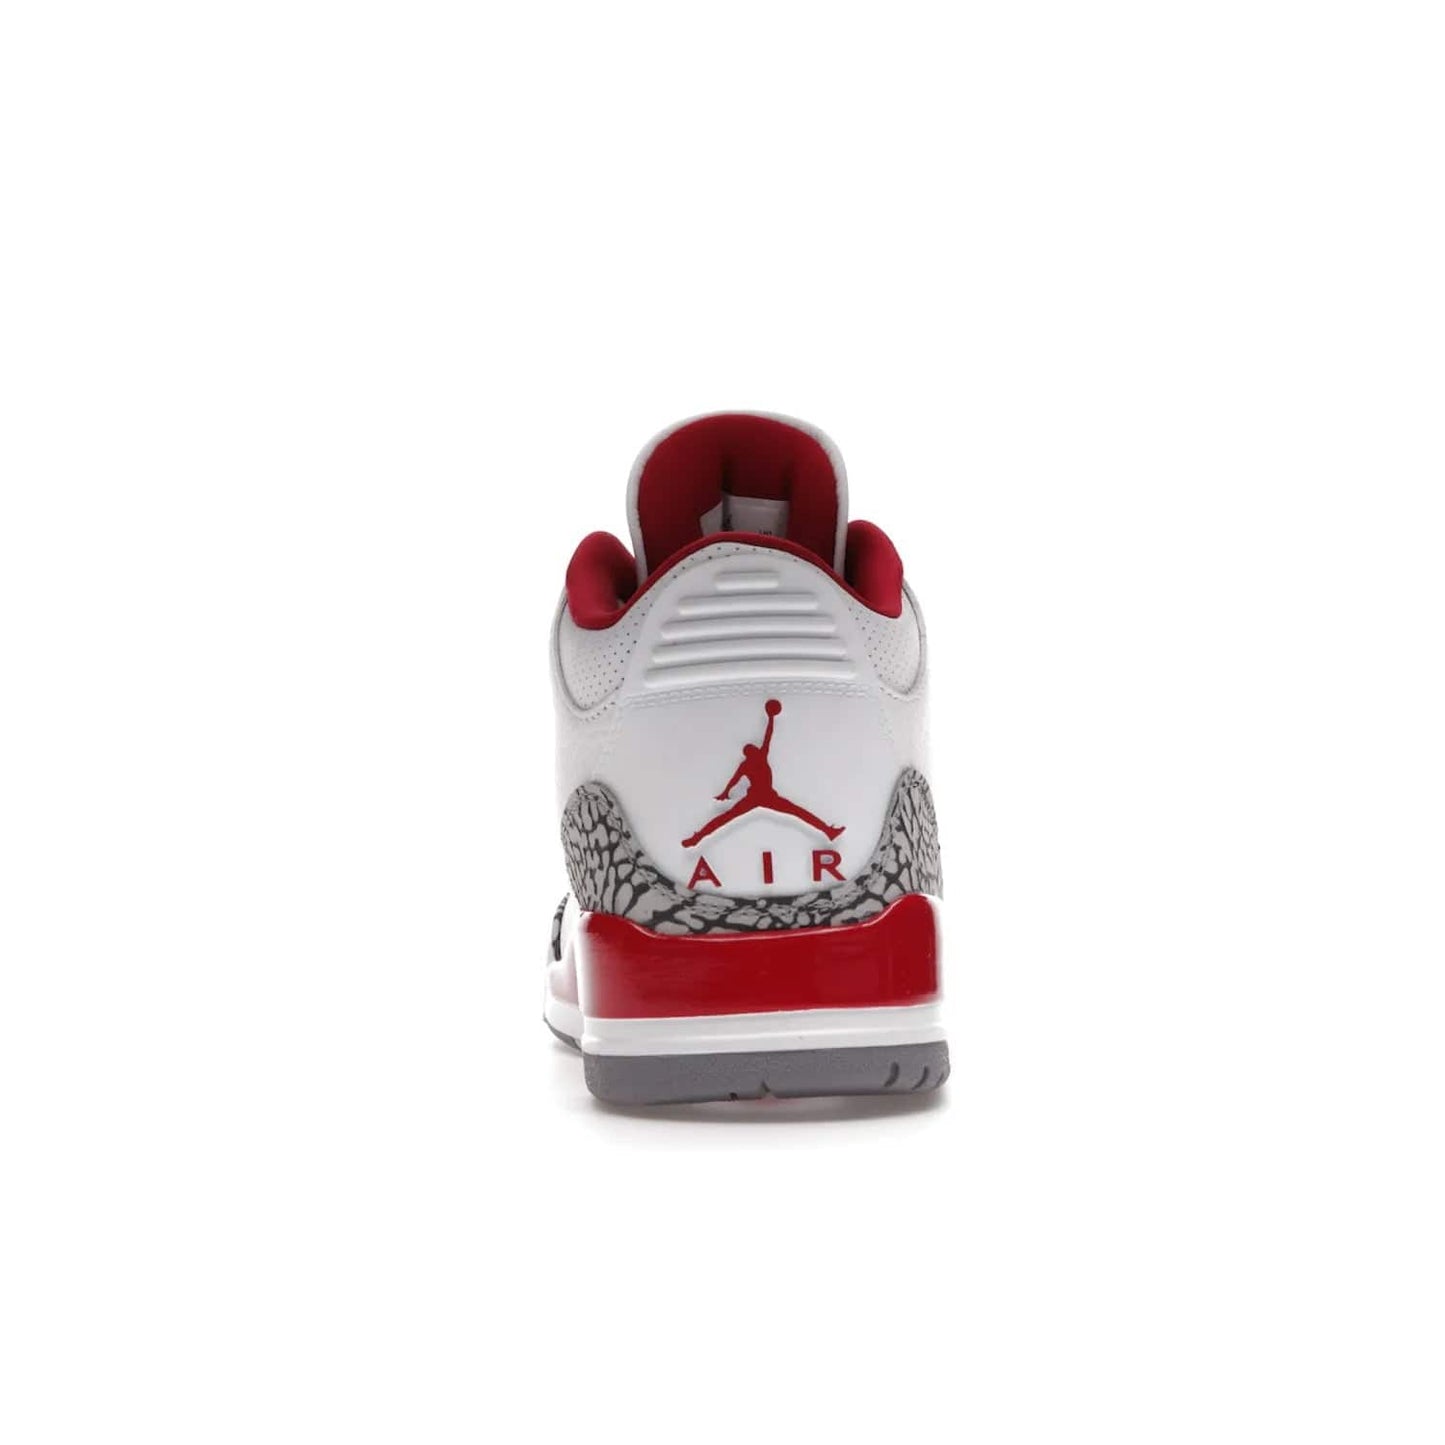 Jordan 3 Retro Cardinal Red - Image 28 - Only at www.BallersClubKickz.com - Air Jordan 3 Retro Cardinal Red combines classic style and modern appeal - white tumbled leather, signature Elephant Print overlays, cardinal red midsoles, Jumpman logo embroidery. Available Feb 2022.